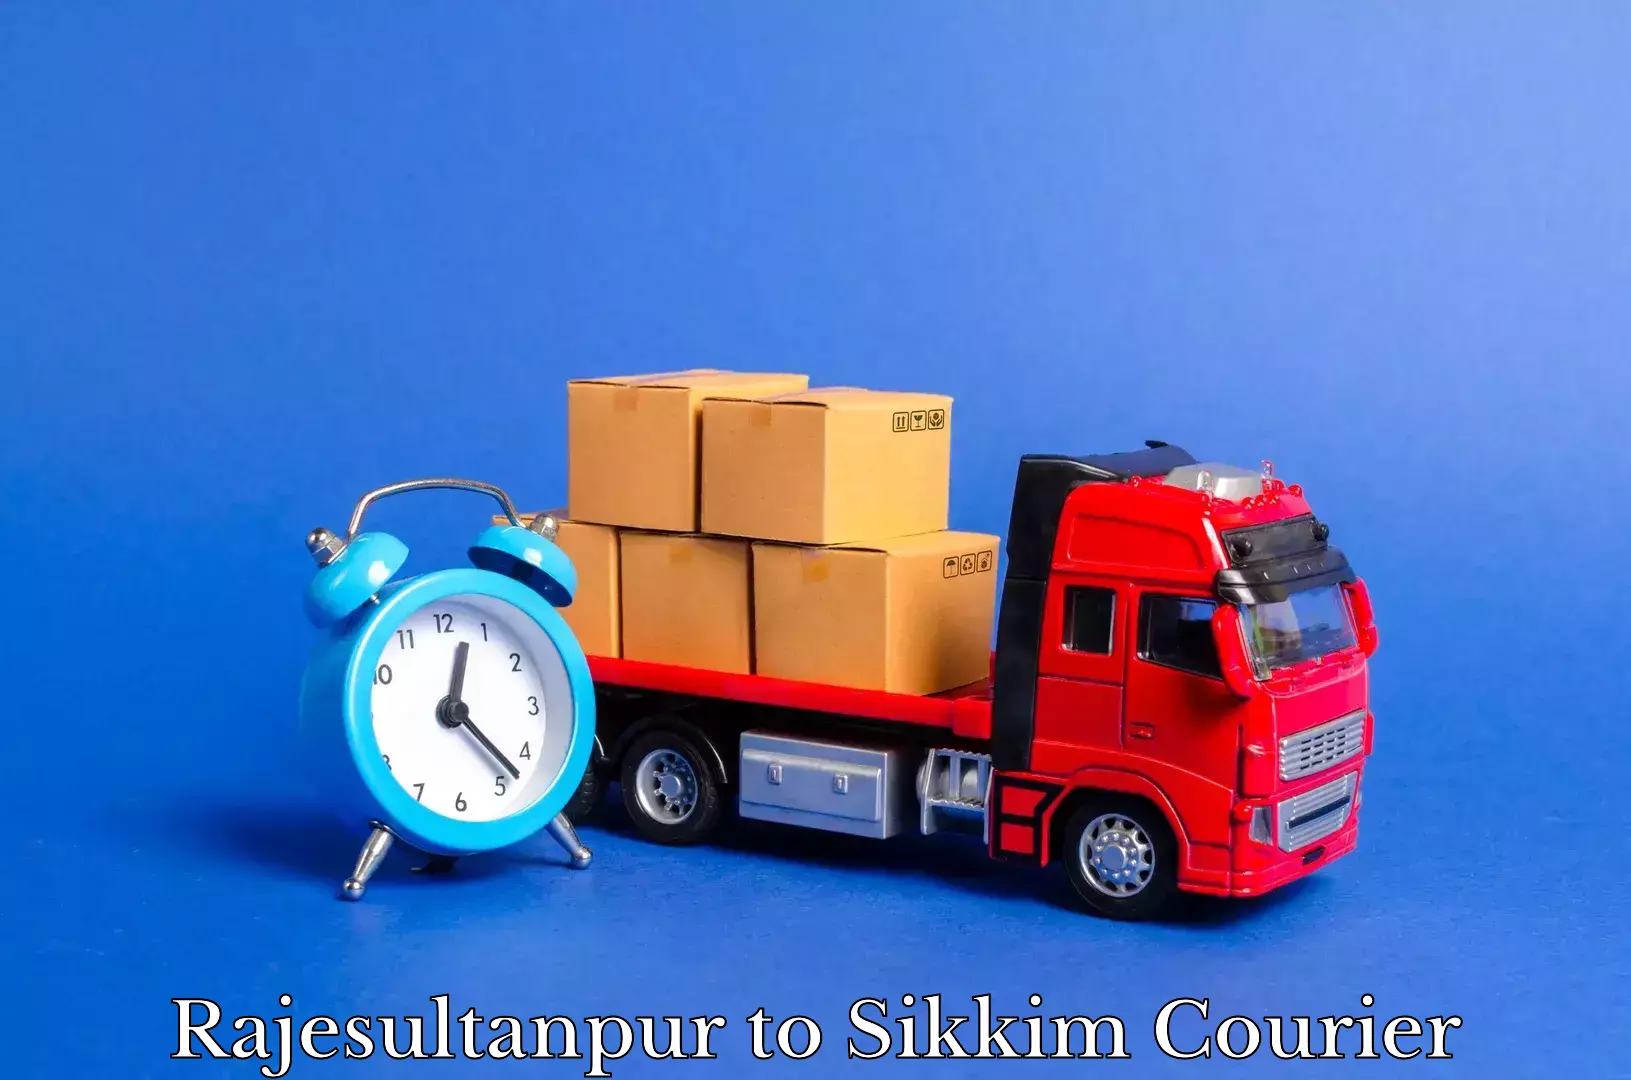 Furniture moving experts Rajesultanpur to Pelling